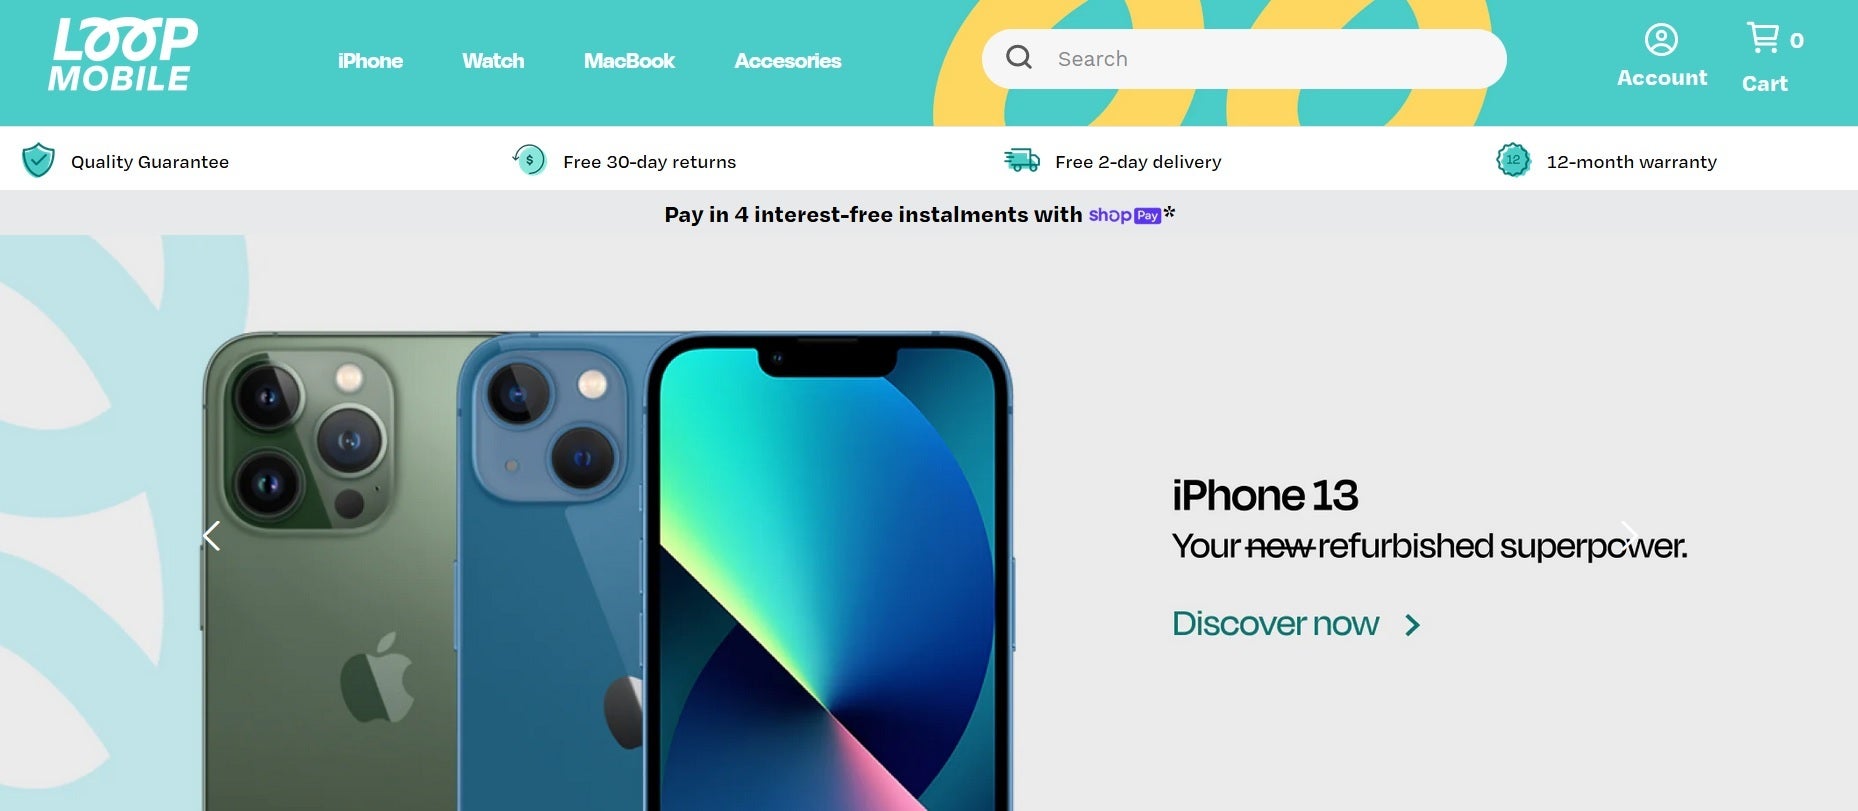 You can buy refurbished iPhone units from Alchemy's Loop Mobile website - This is how a used iPhone unit gets a second shot at life